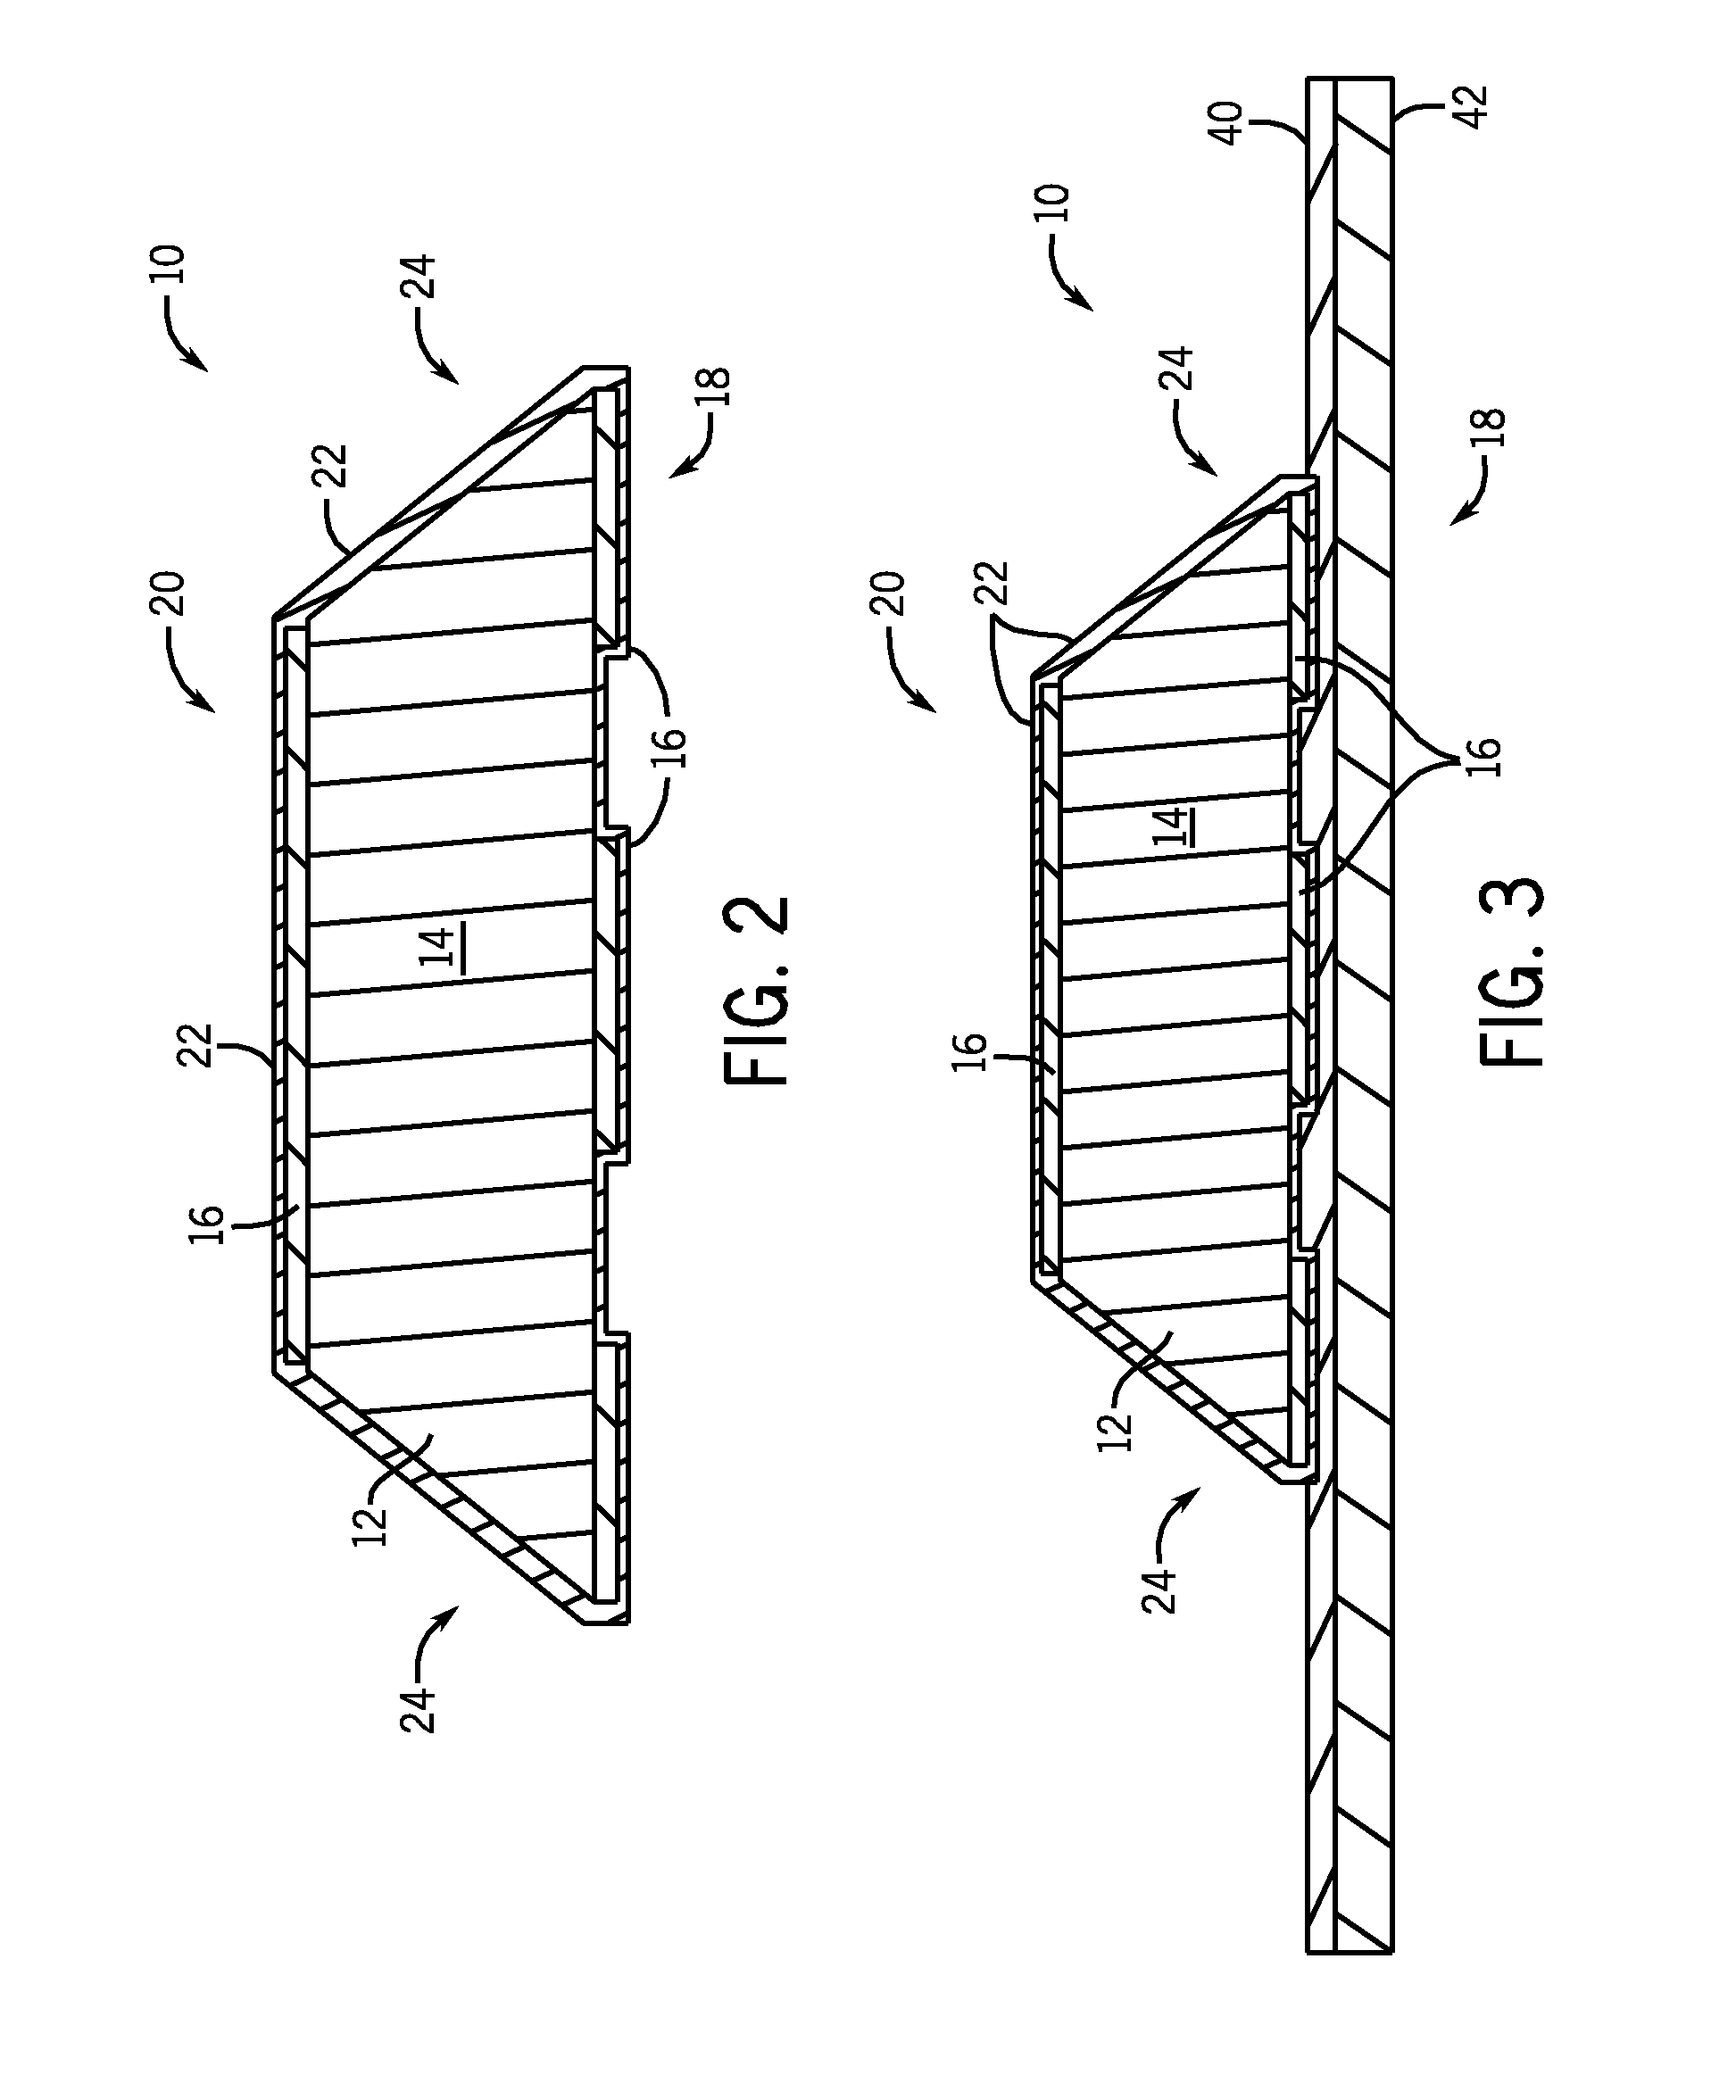 Semiconductor device package and method of manufacturing thereof